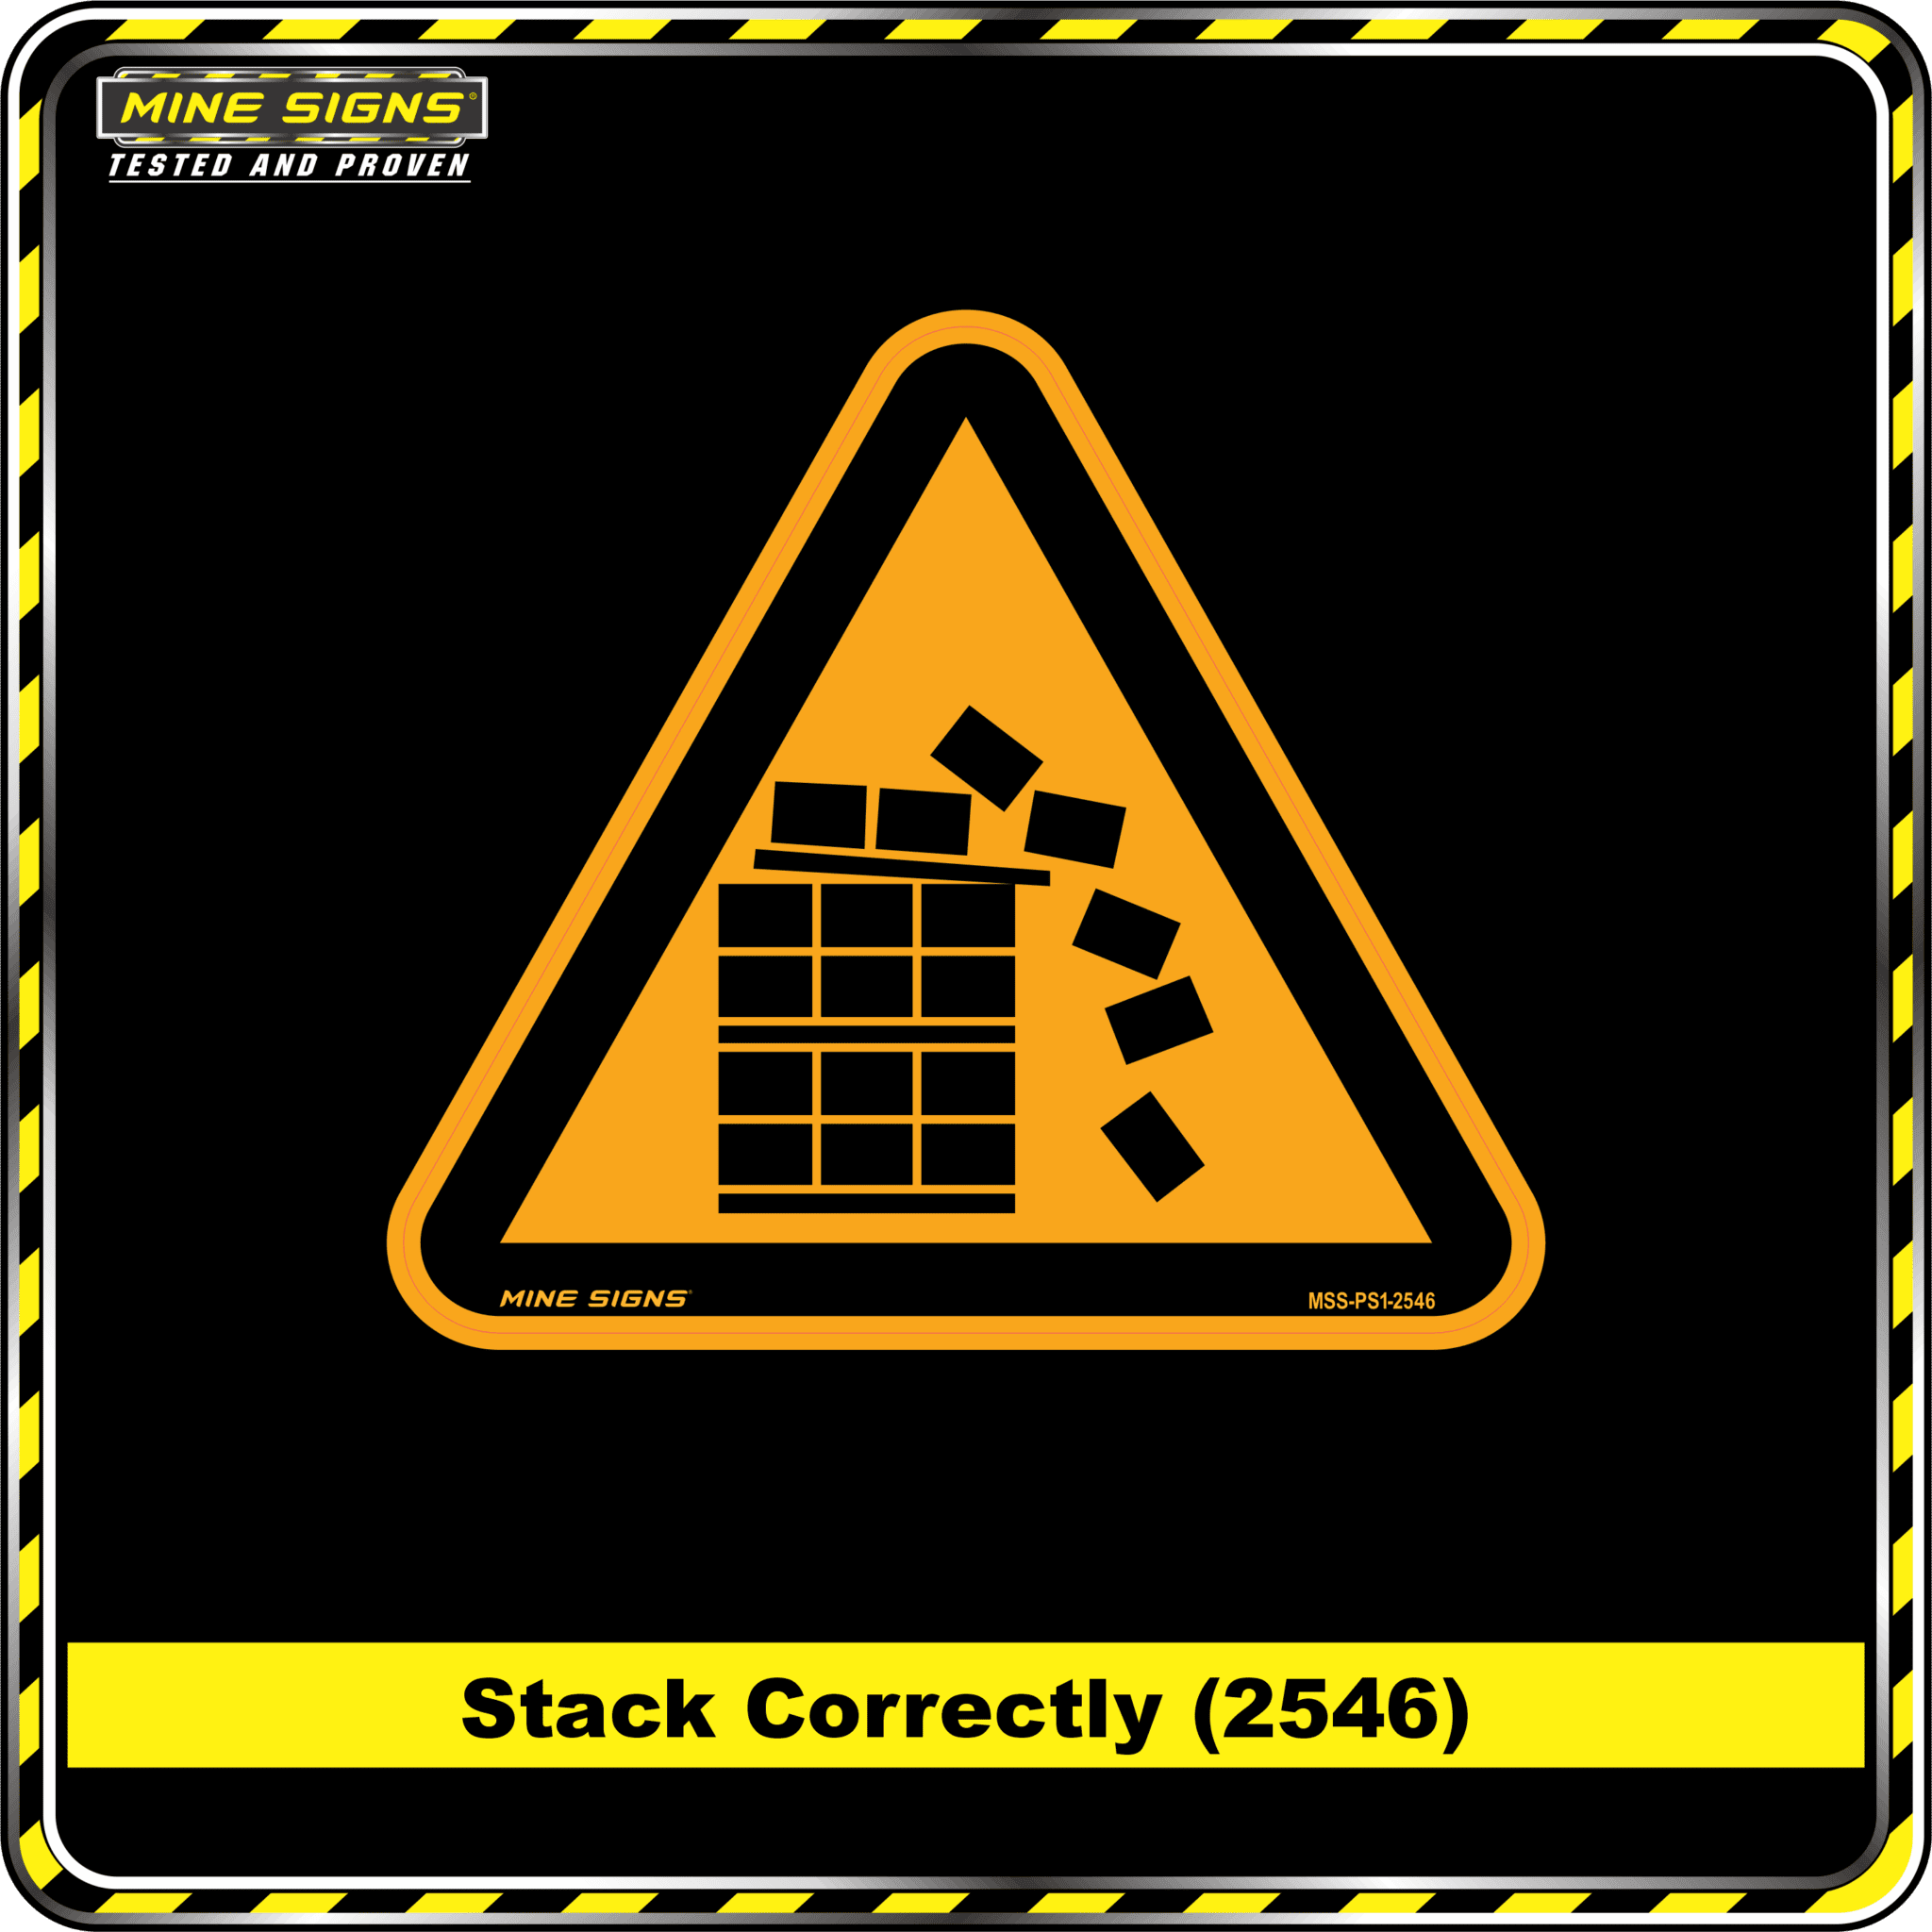 MS - Product Background - Safety Signs - Stack Correctly 2546